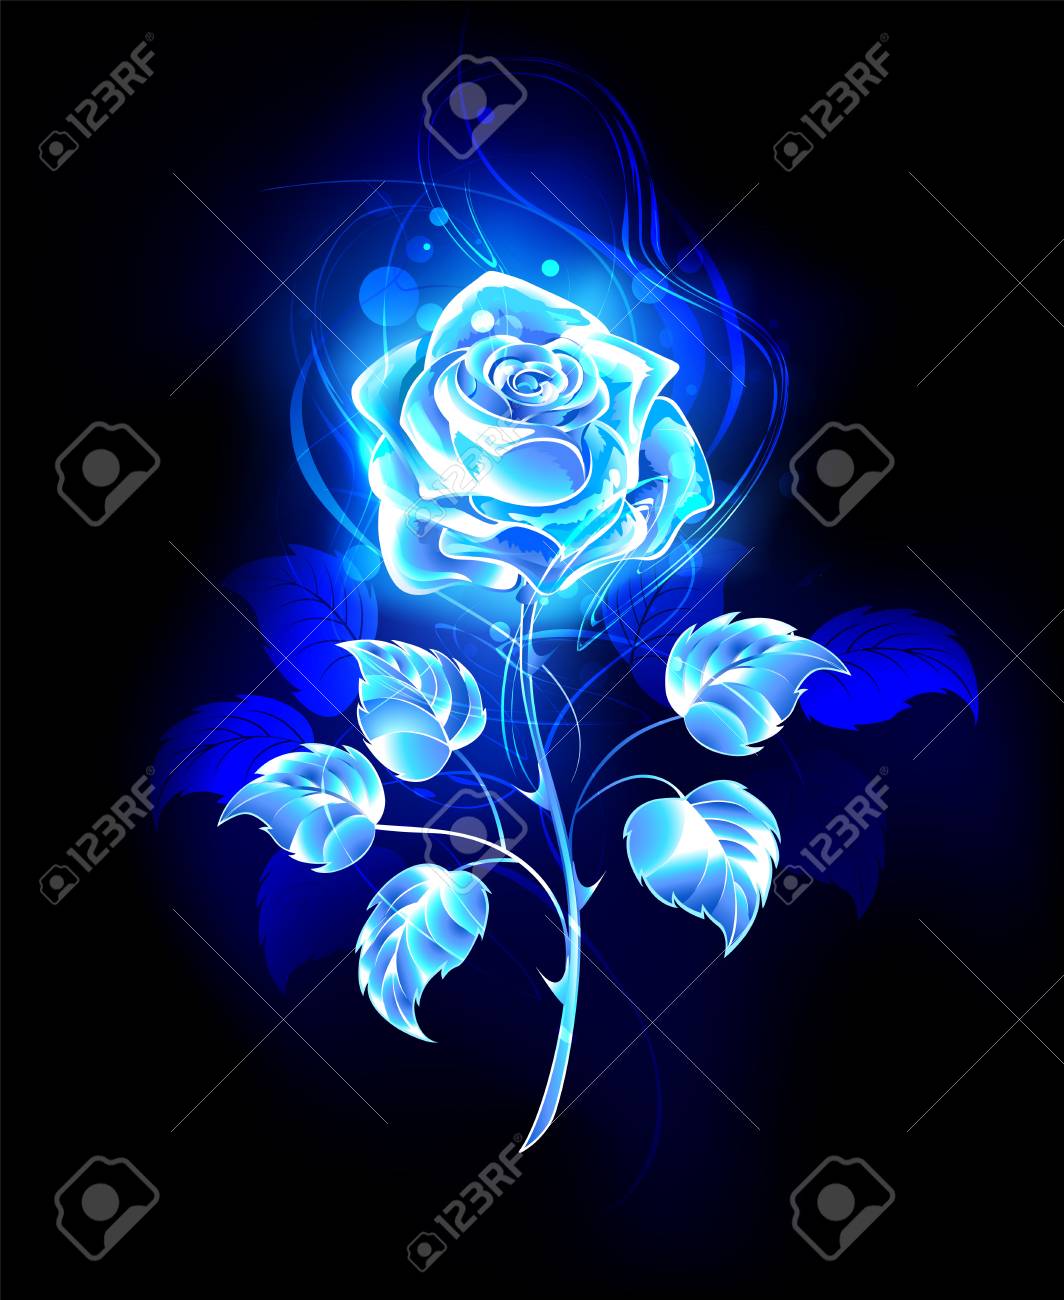 Blooming Abstract Rose From Blue Flame On Black Background